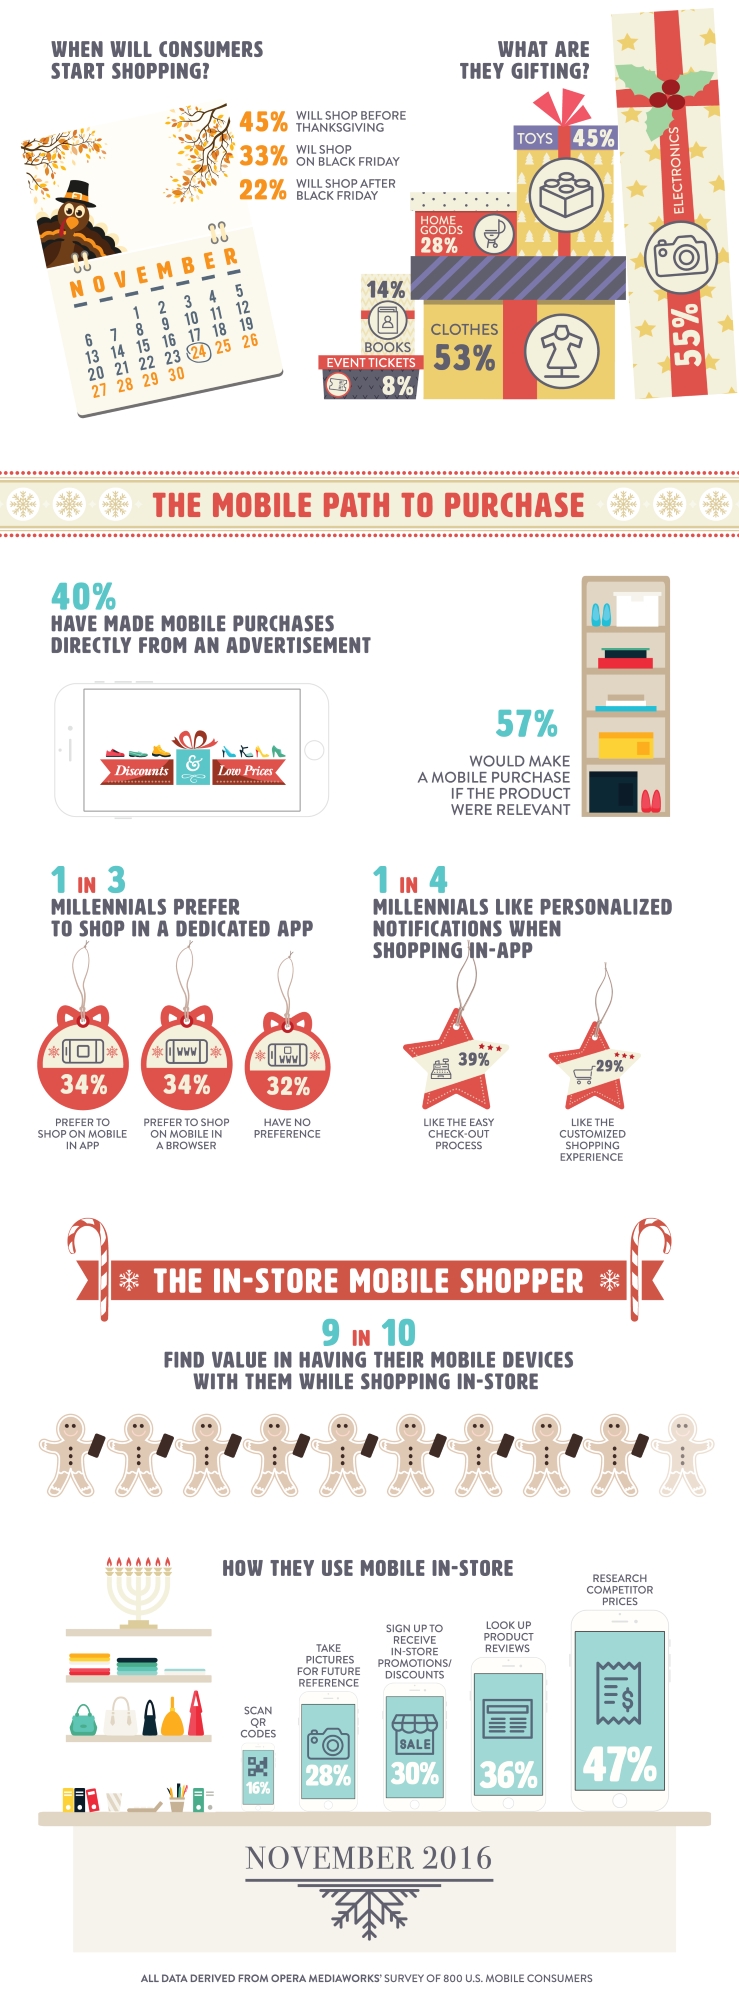 Infographic: Mobile Sites and Apps Neck-and-neck for Christmas Shoppers